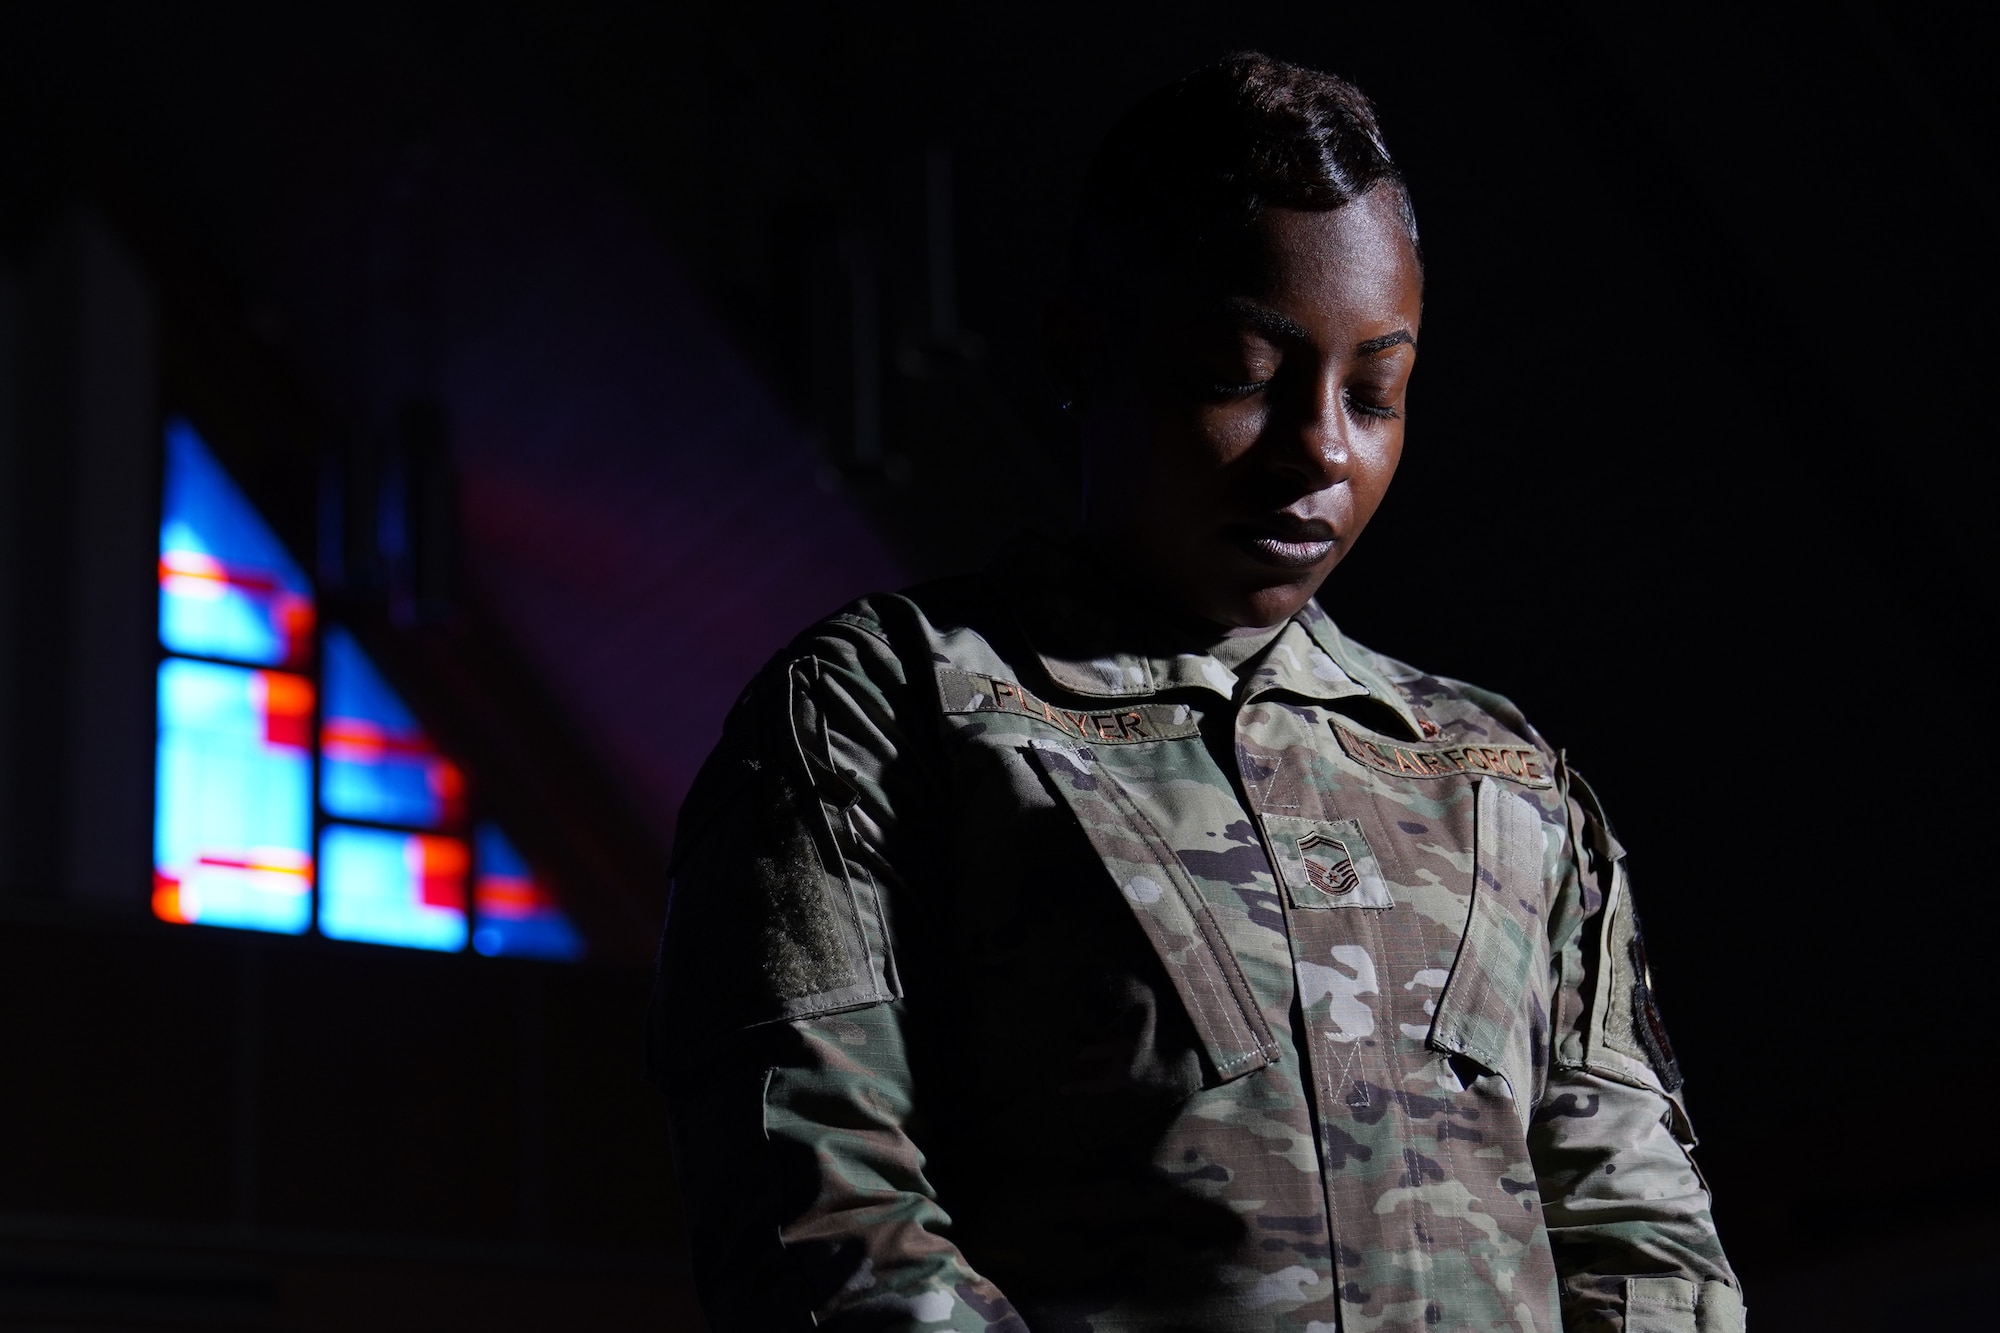 U.S. Air Force Senior Master Sgt. Jessica Player, Mathies NCO Academy director of education, takes time to give thanks inside the Larcher Chapel at Keesler Air Force Base Dec. 10, 2020. As a practicing Muslim, Player follows her faith to help strengthen her purpose. (U.S. Air Force photo by Airman 1st Class Seth Haddix)